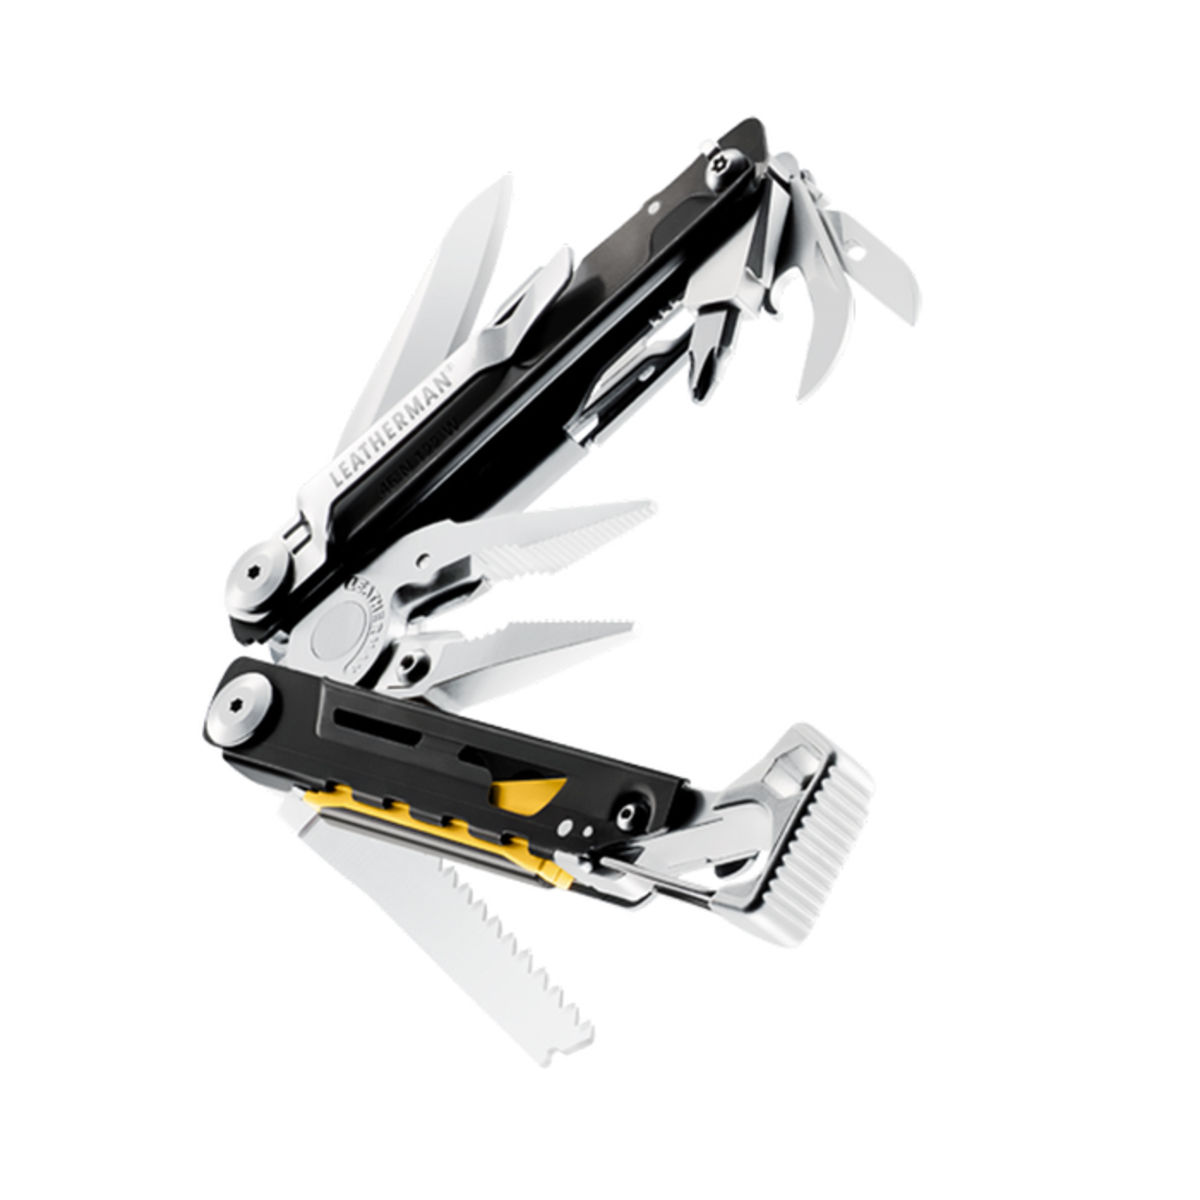 Pince multifonction Leatherman SIGNAL - 19 outils